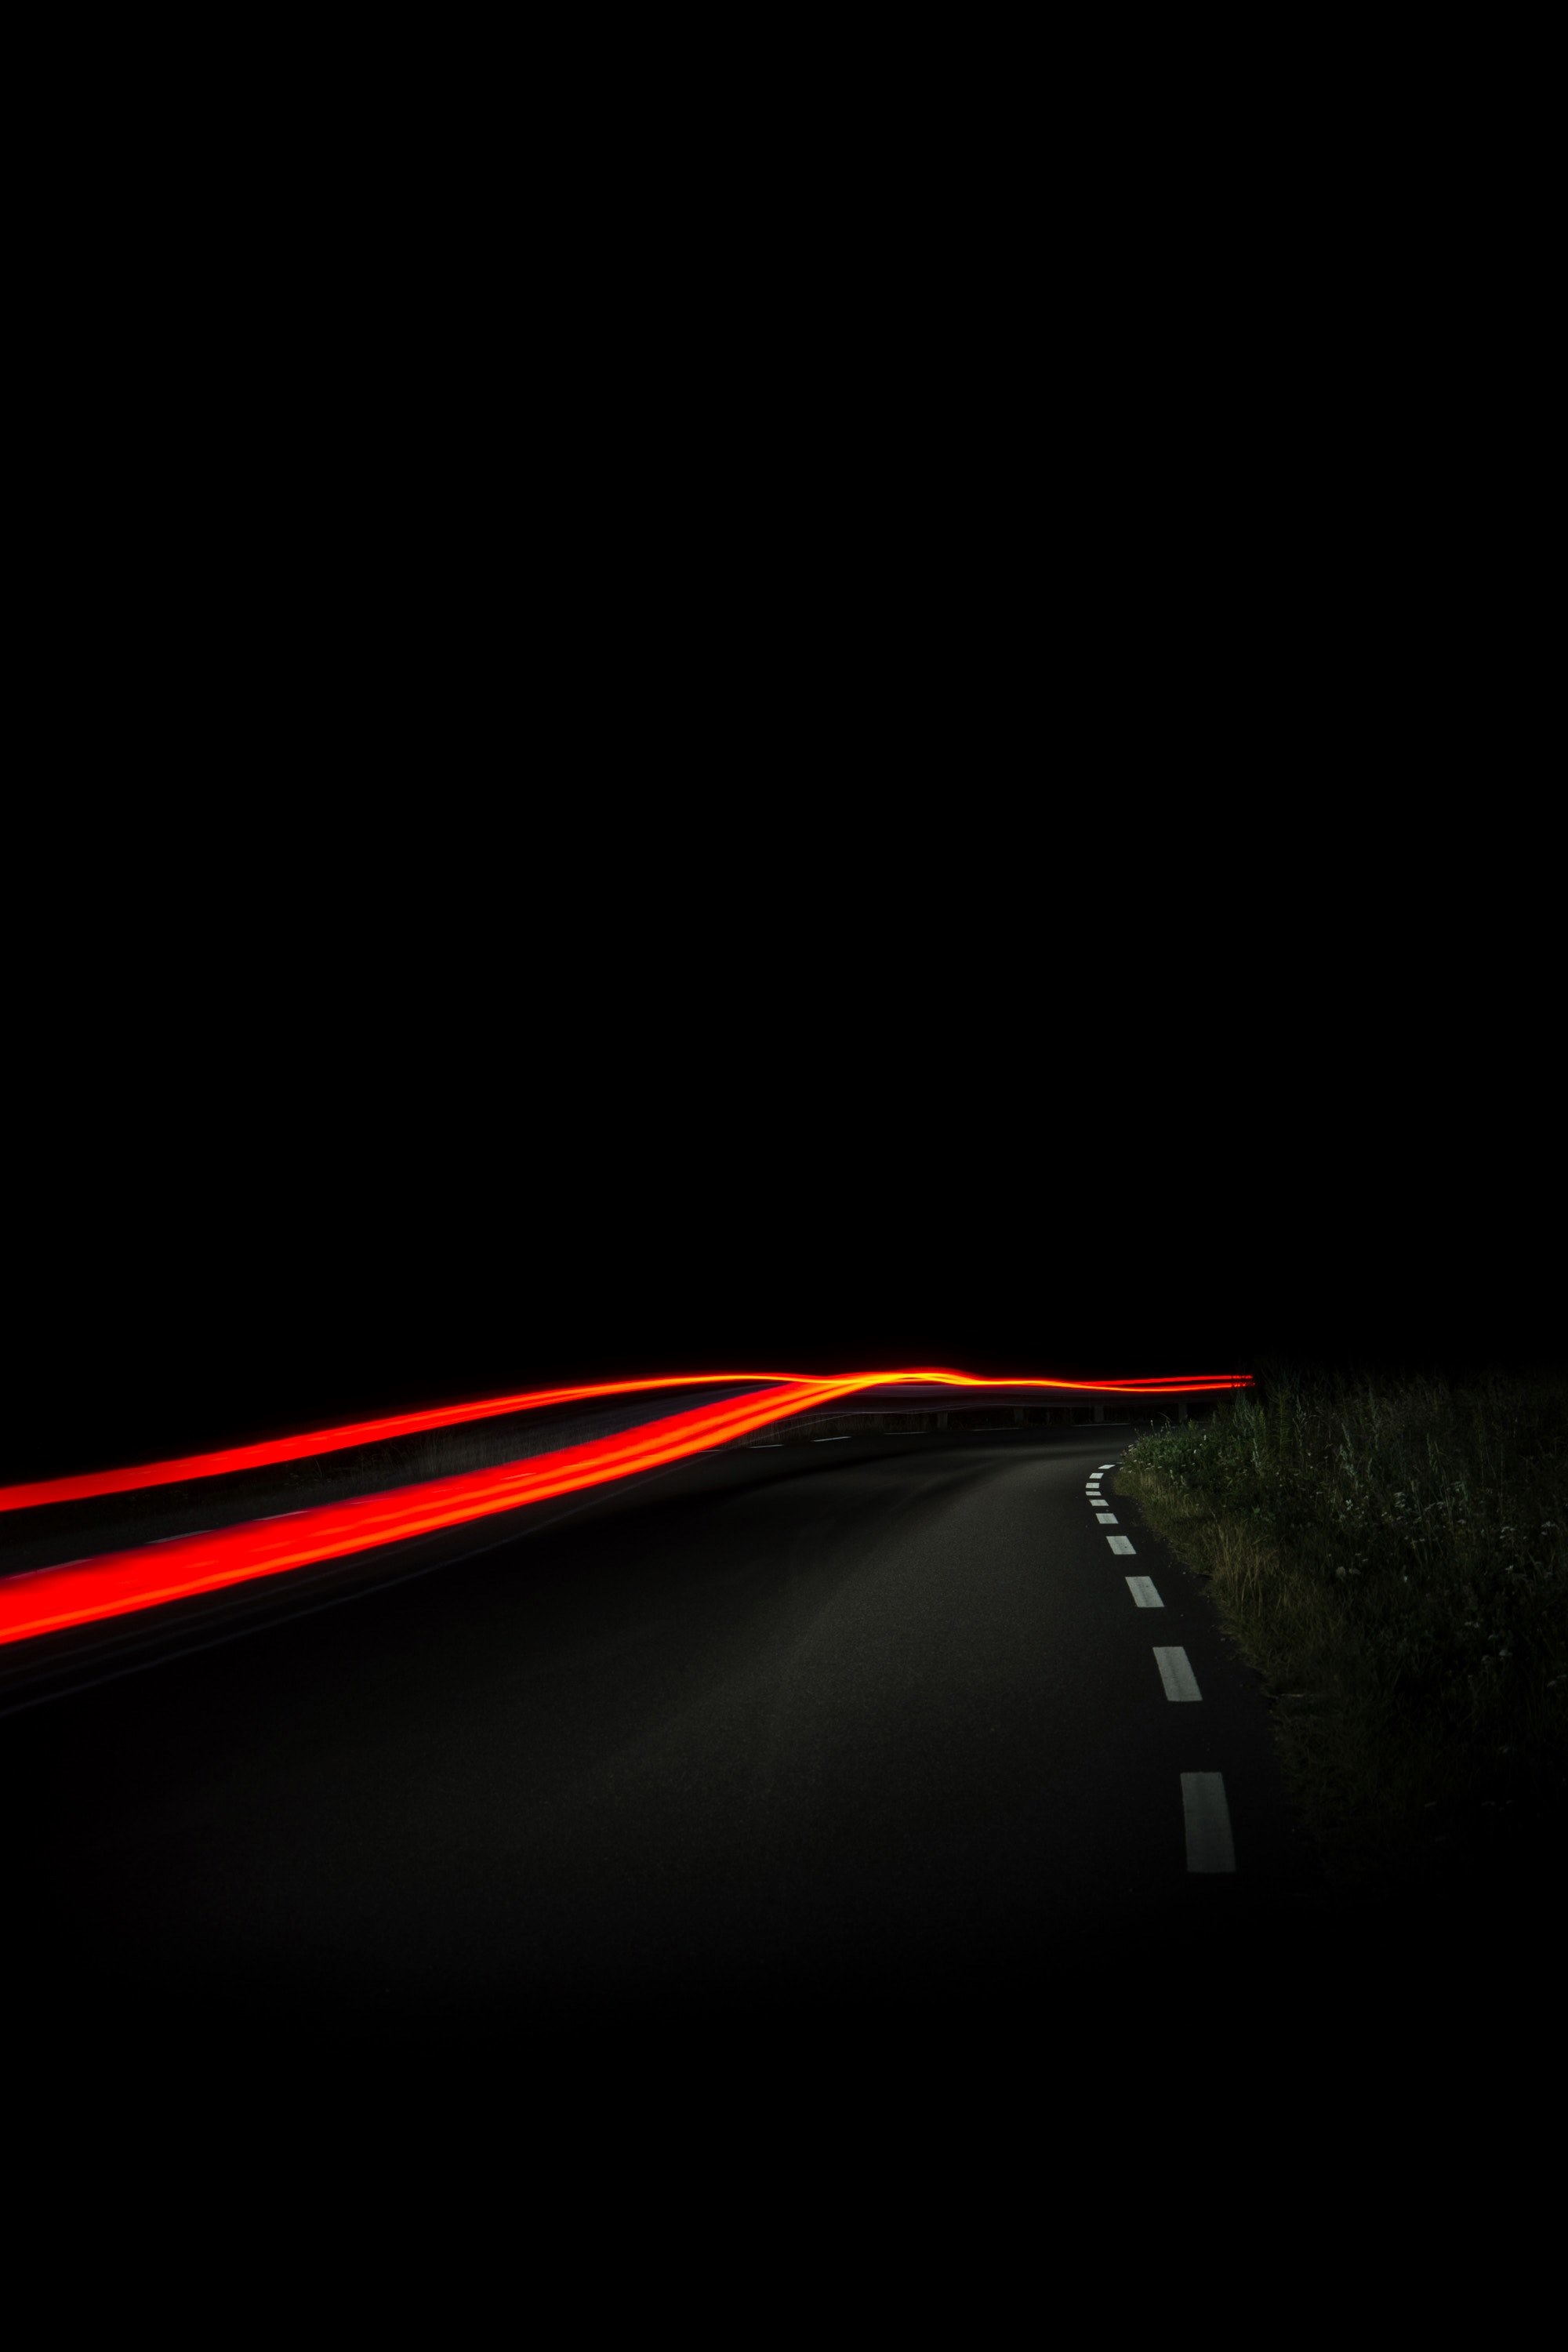 Wallpaper / a blurry night time shot of a road in sa with red car trails amidst the streets darkness, sa street light trail at night 4k wallpaper free download